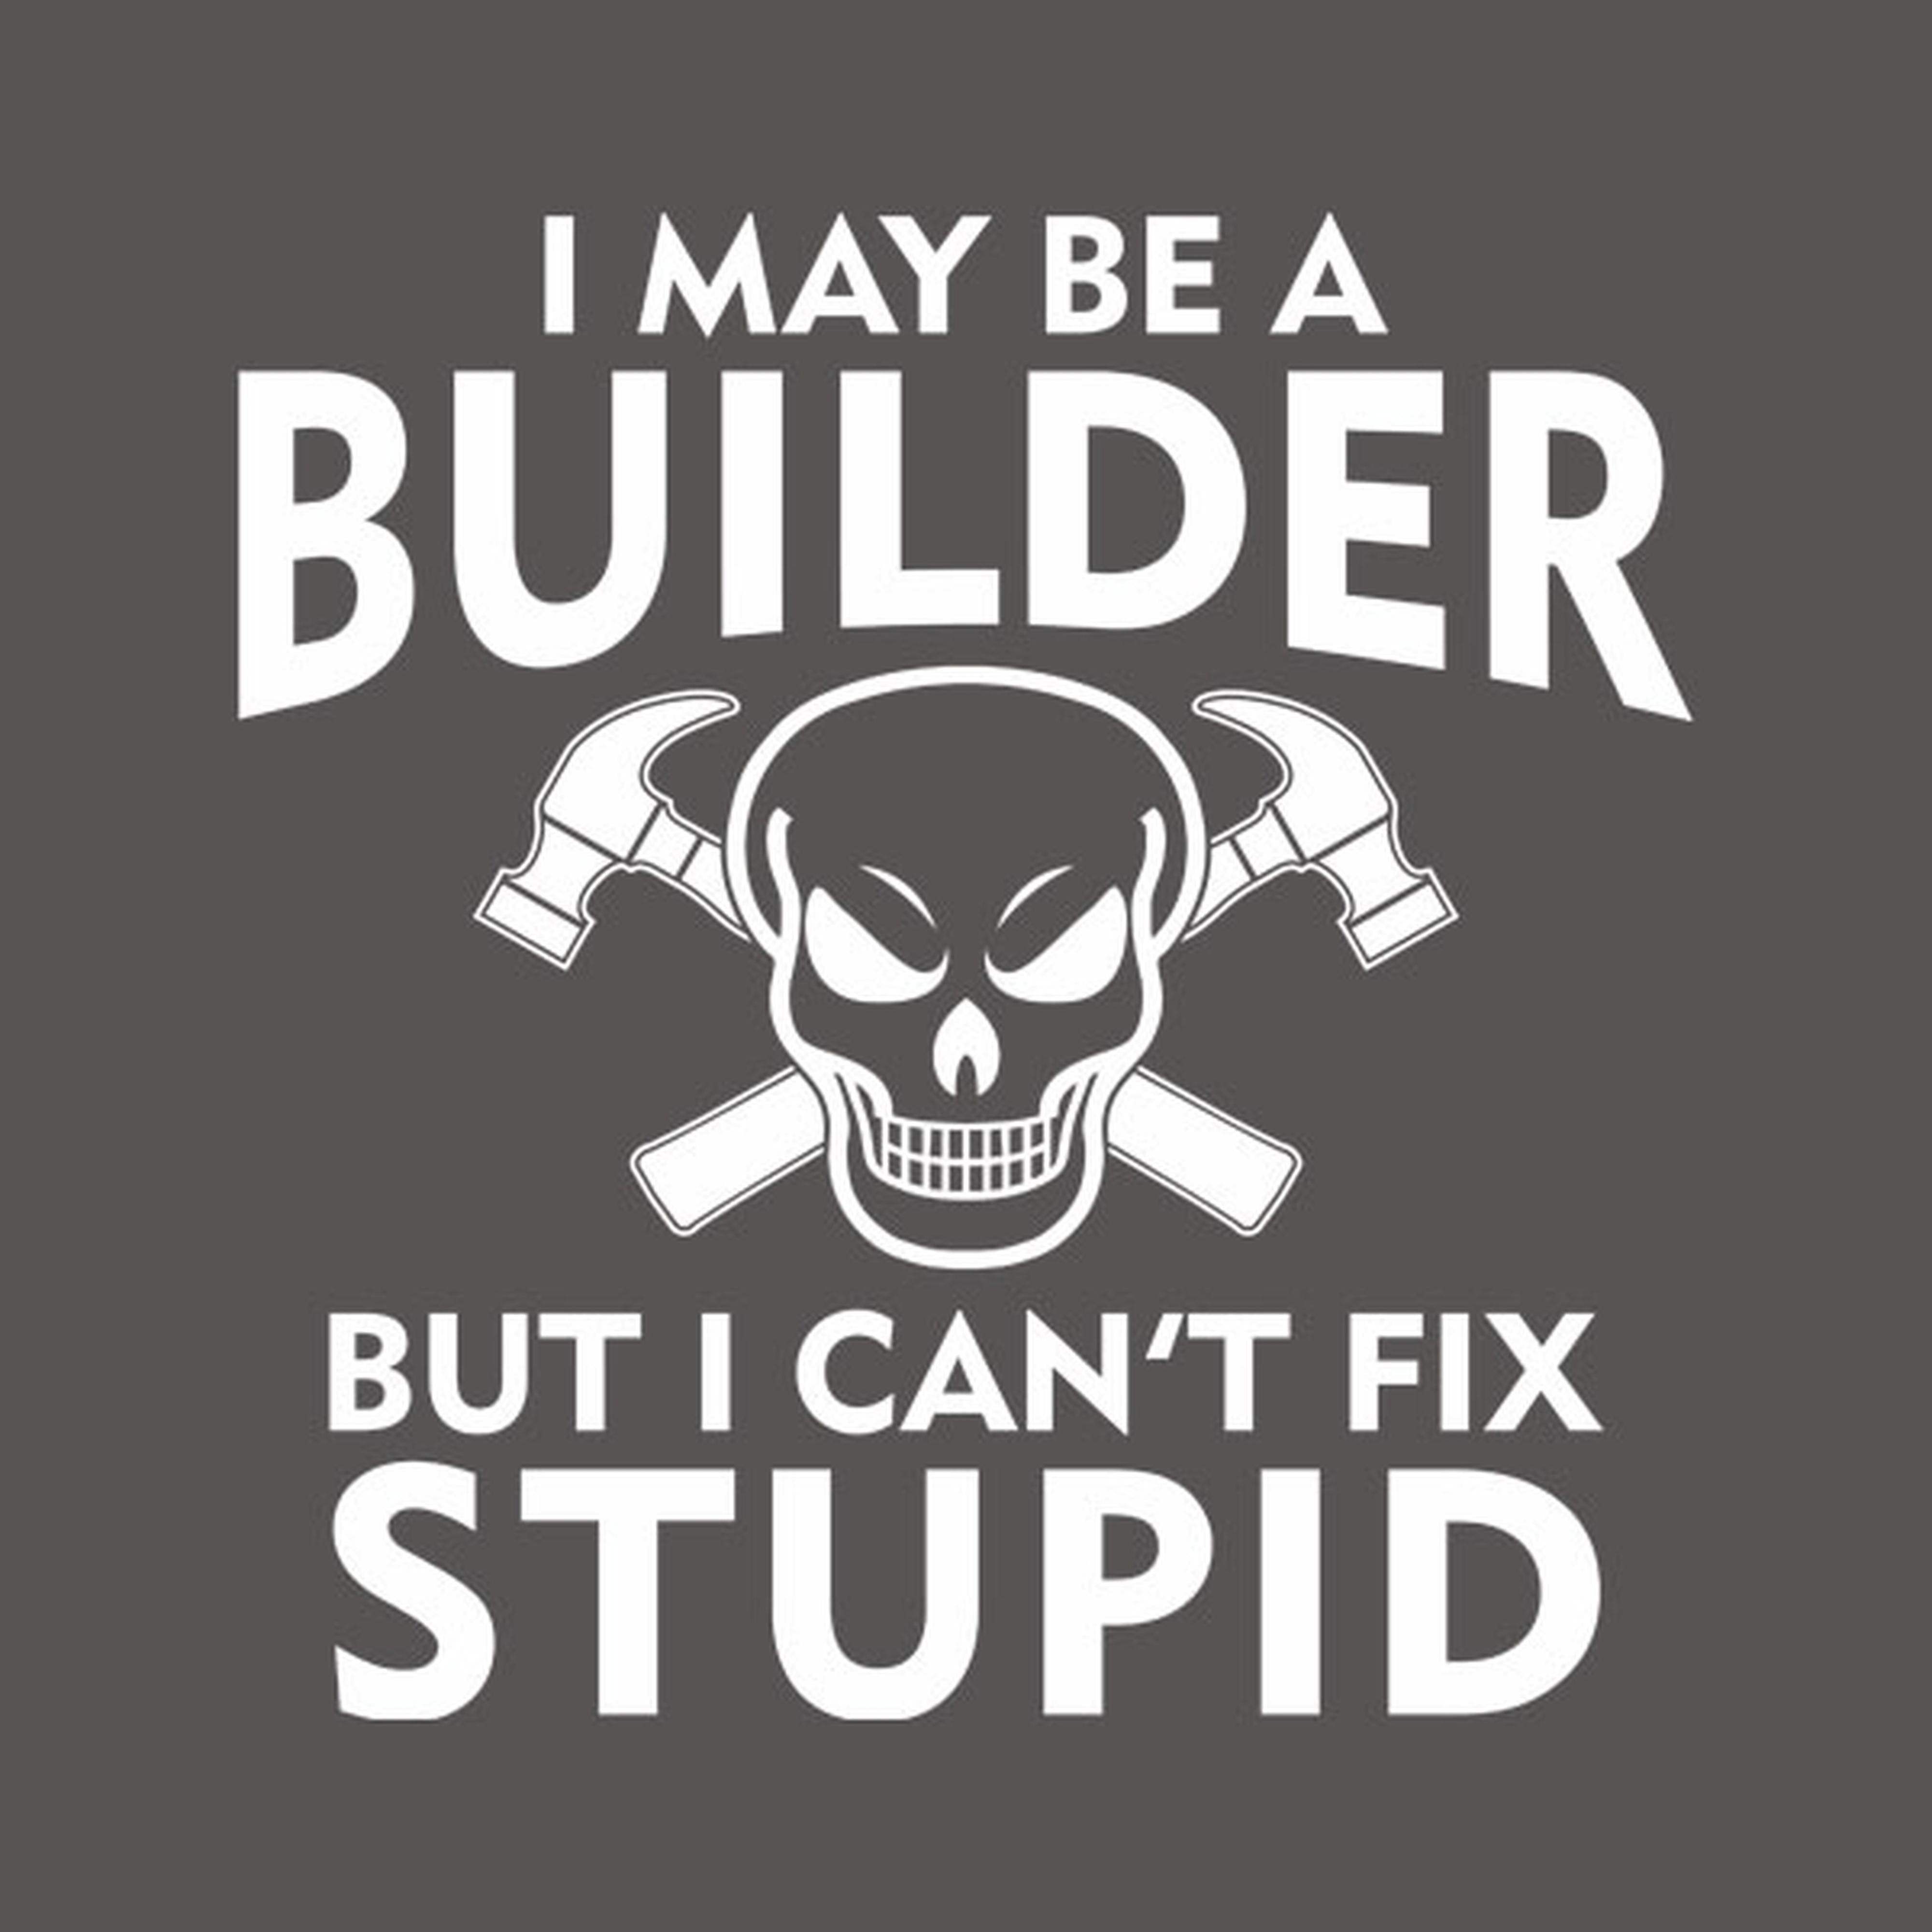 I may be a builder but I can't fix stupid - T-shirt